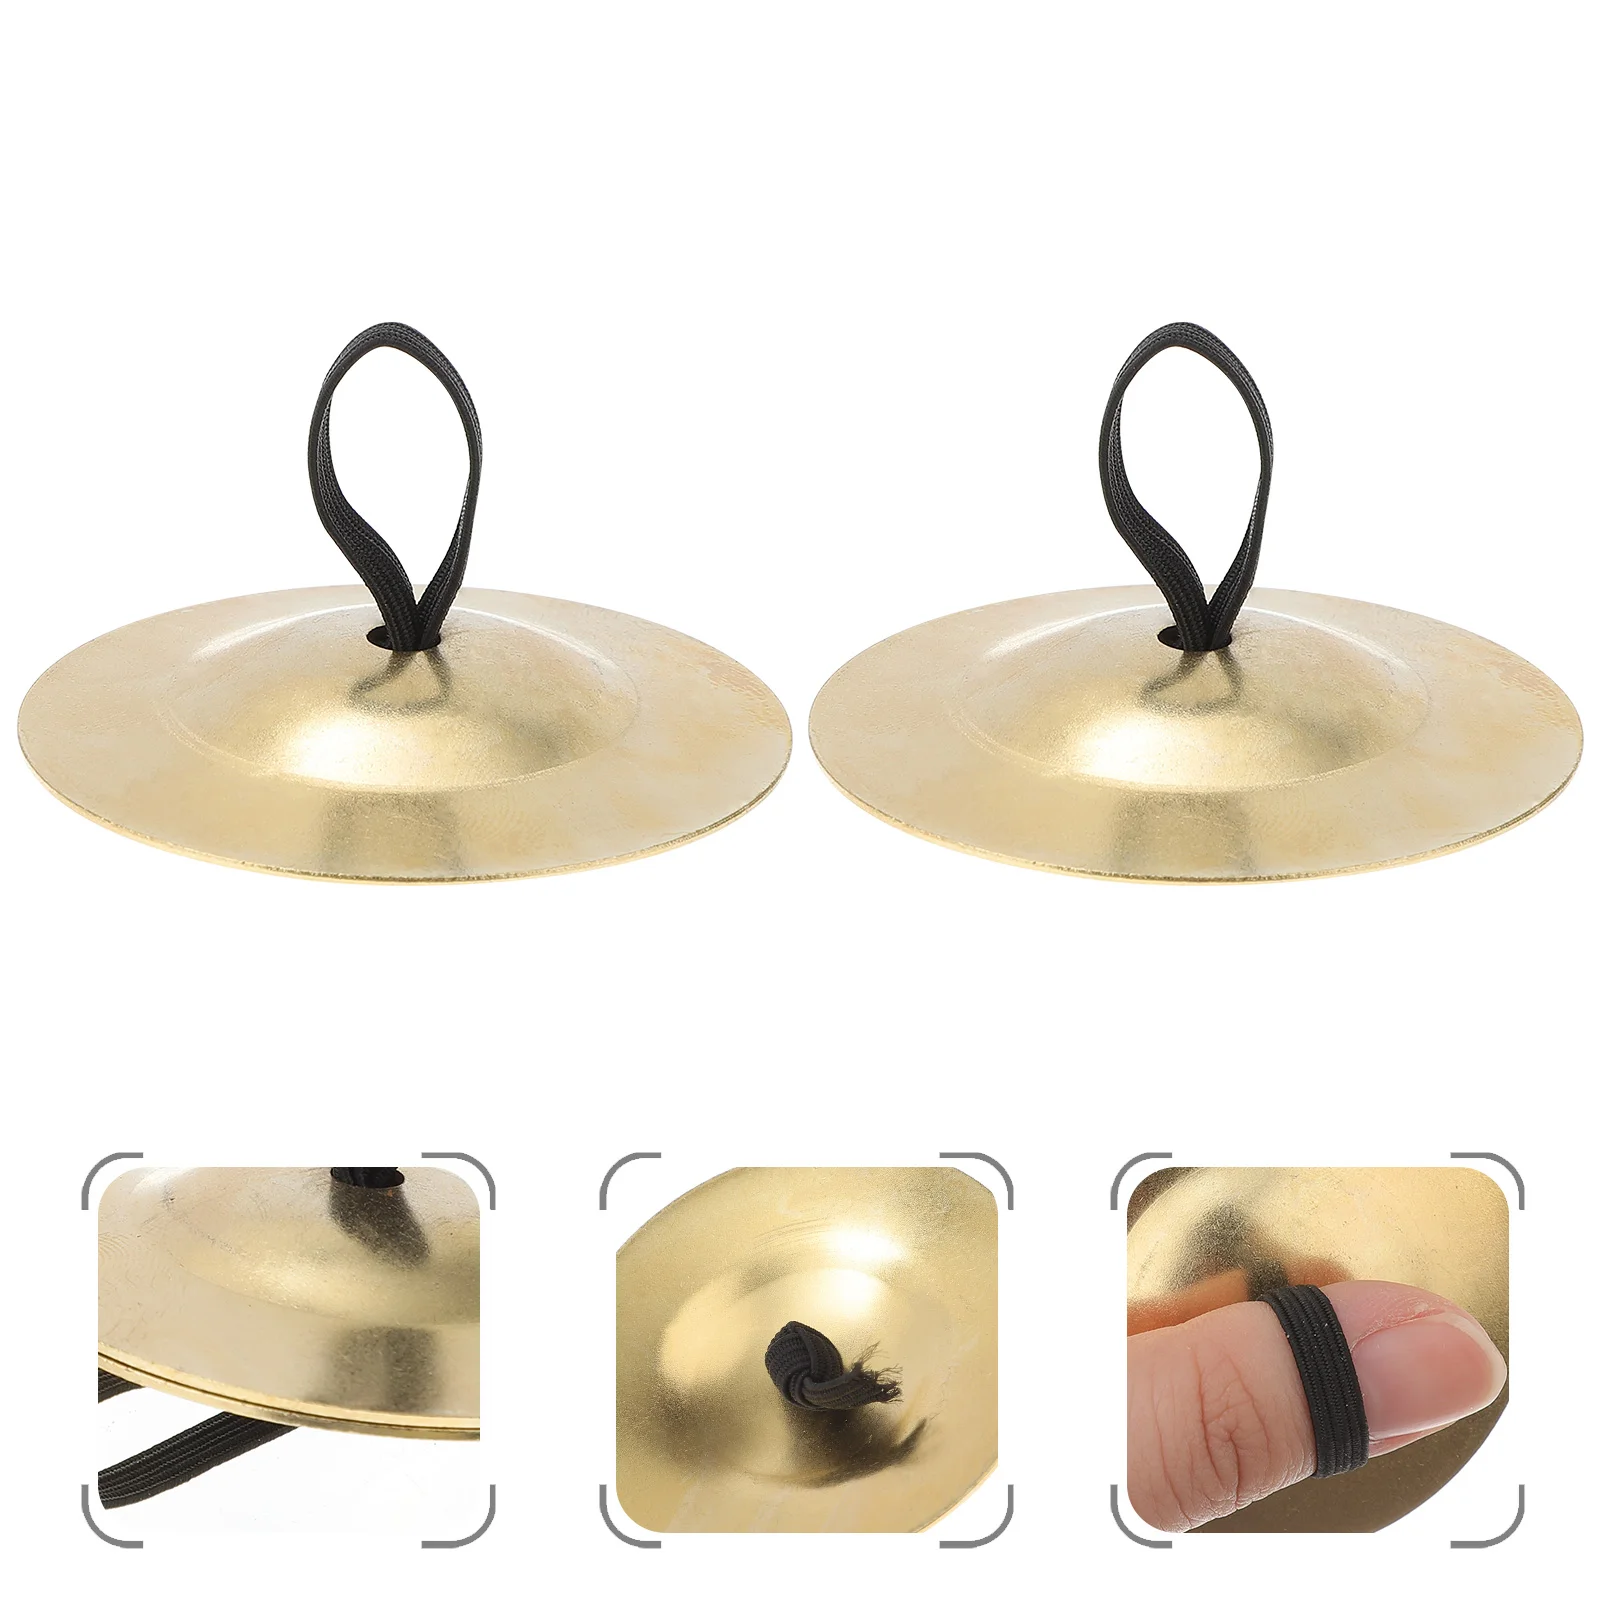 

Finger Cymbals Cymbal Dance Belly Zills Musical Instrument Percussion Toys Dancing Kids Brass Rhythm Dancer Noise Instruments